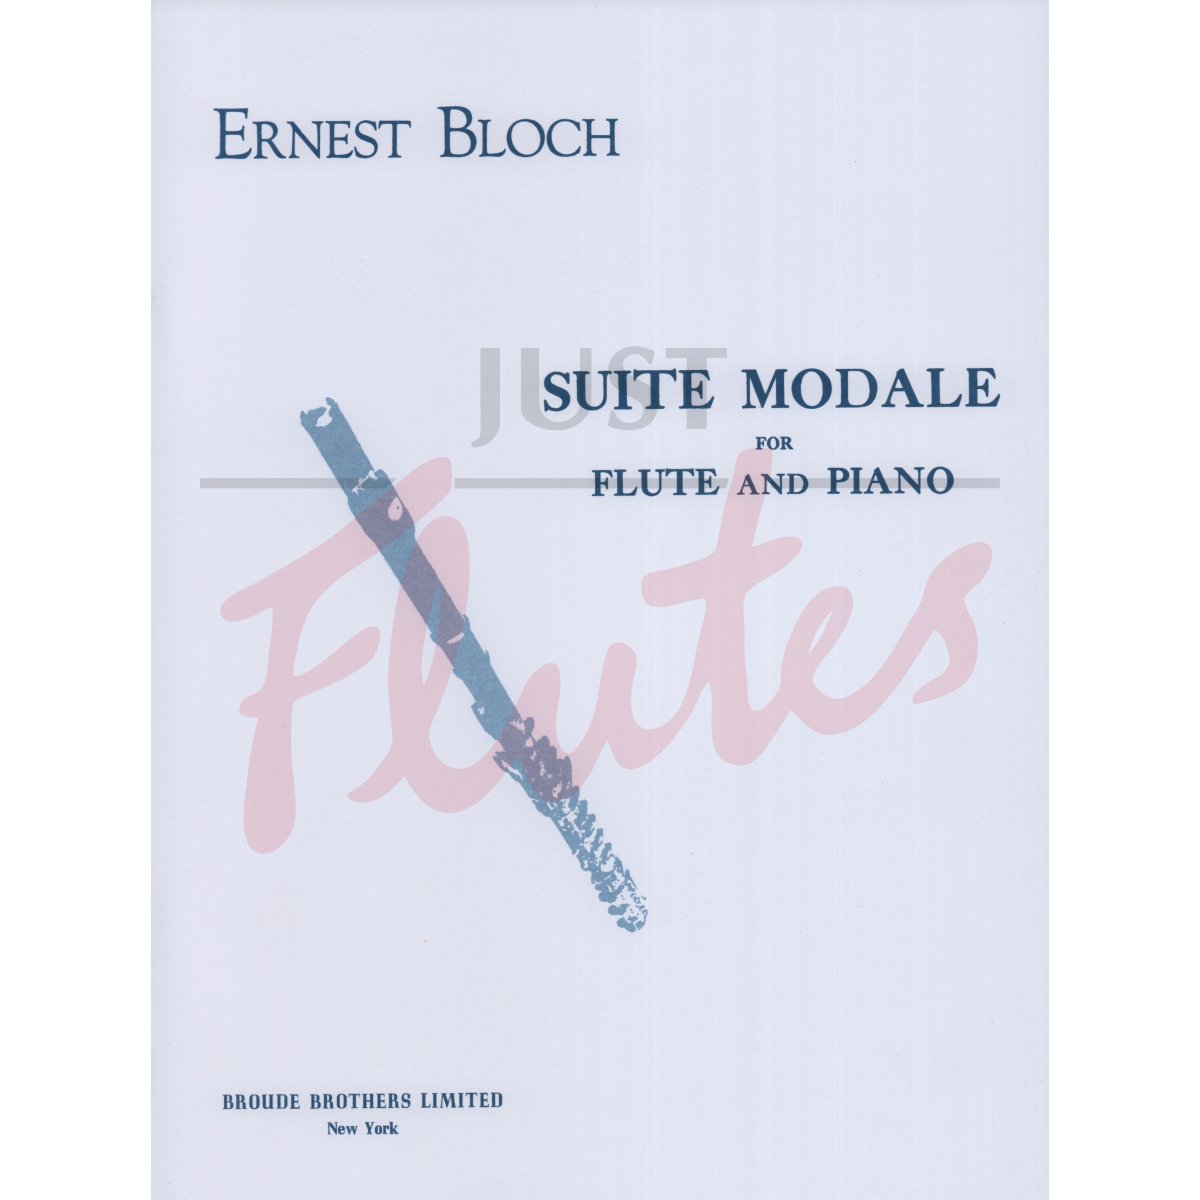 Suite Modale for Flute and Piano